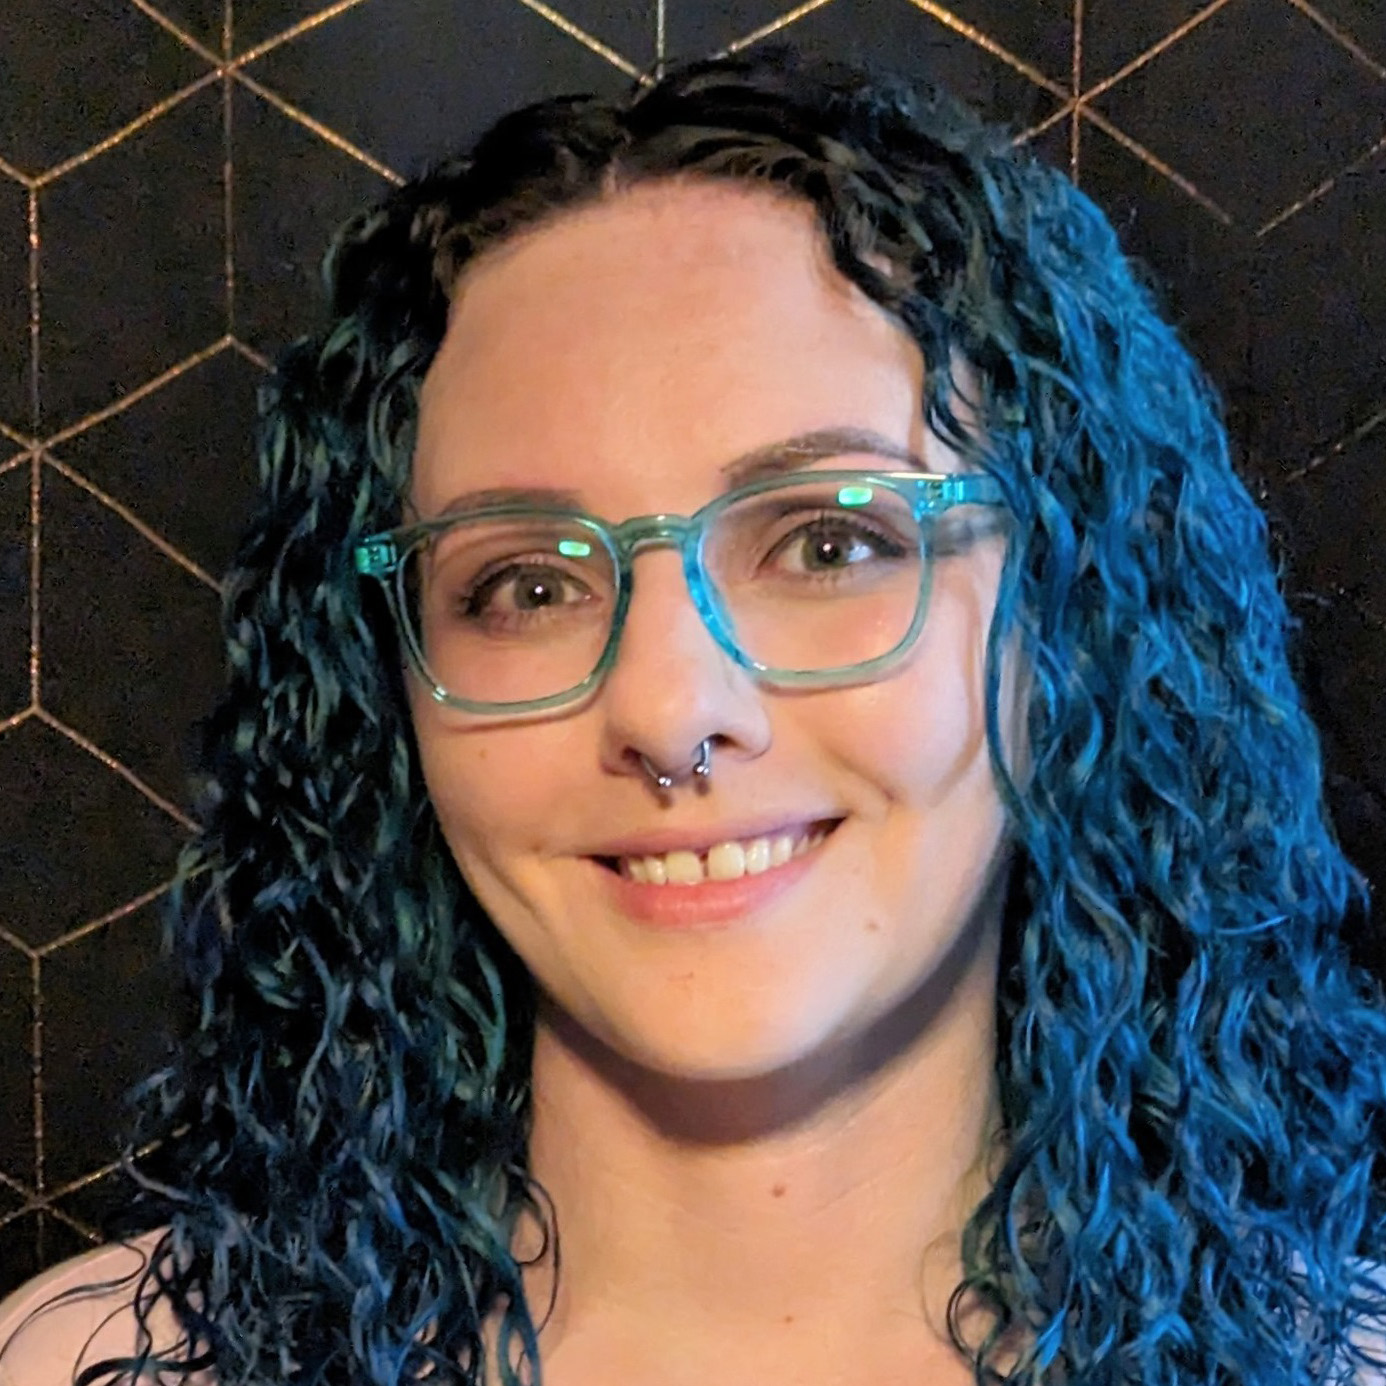 Jenna is a white woman in her early 30s with long, curly blue hair. She wears a pink V-neck t-shirt and square-framed aqua glasses. Her makeup is minimalistic, and a silver septum piercing hangs from her nose.